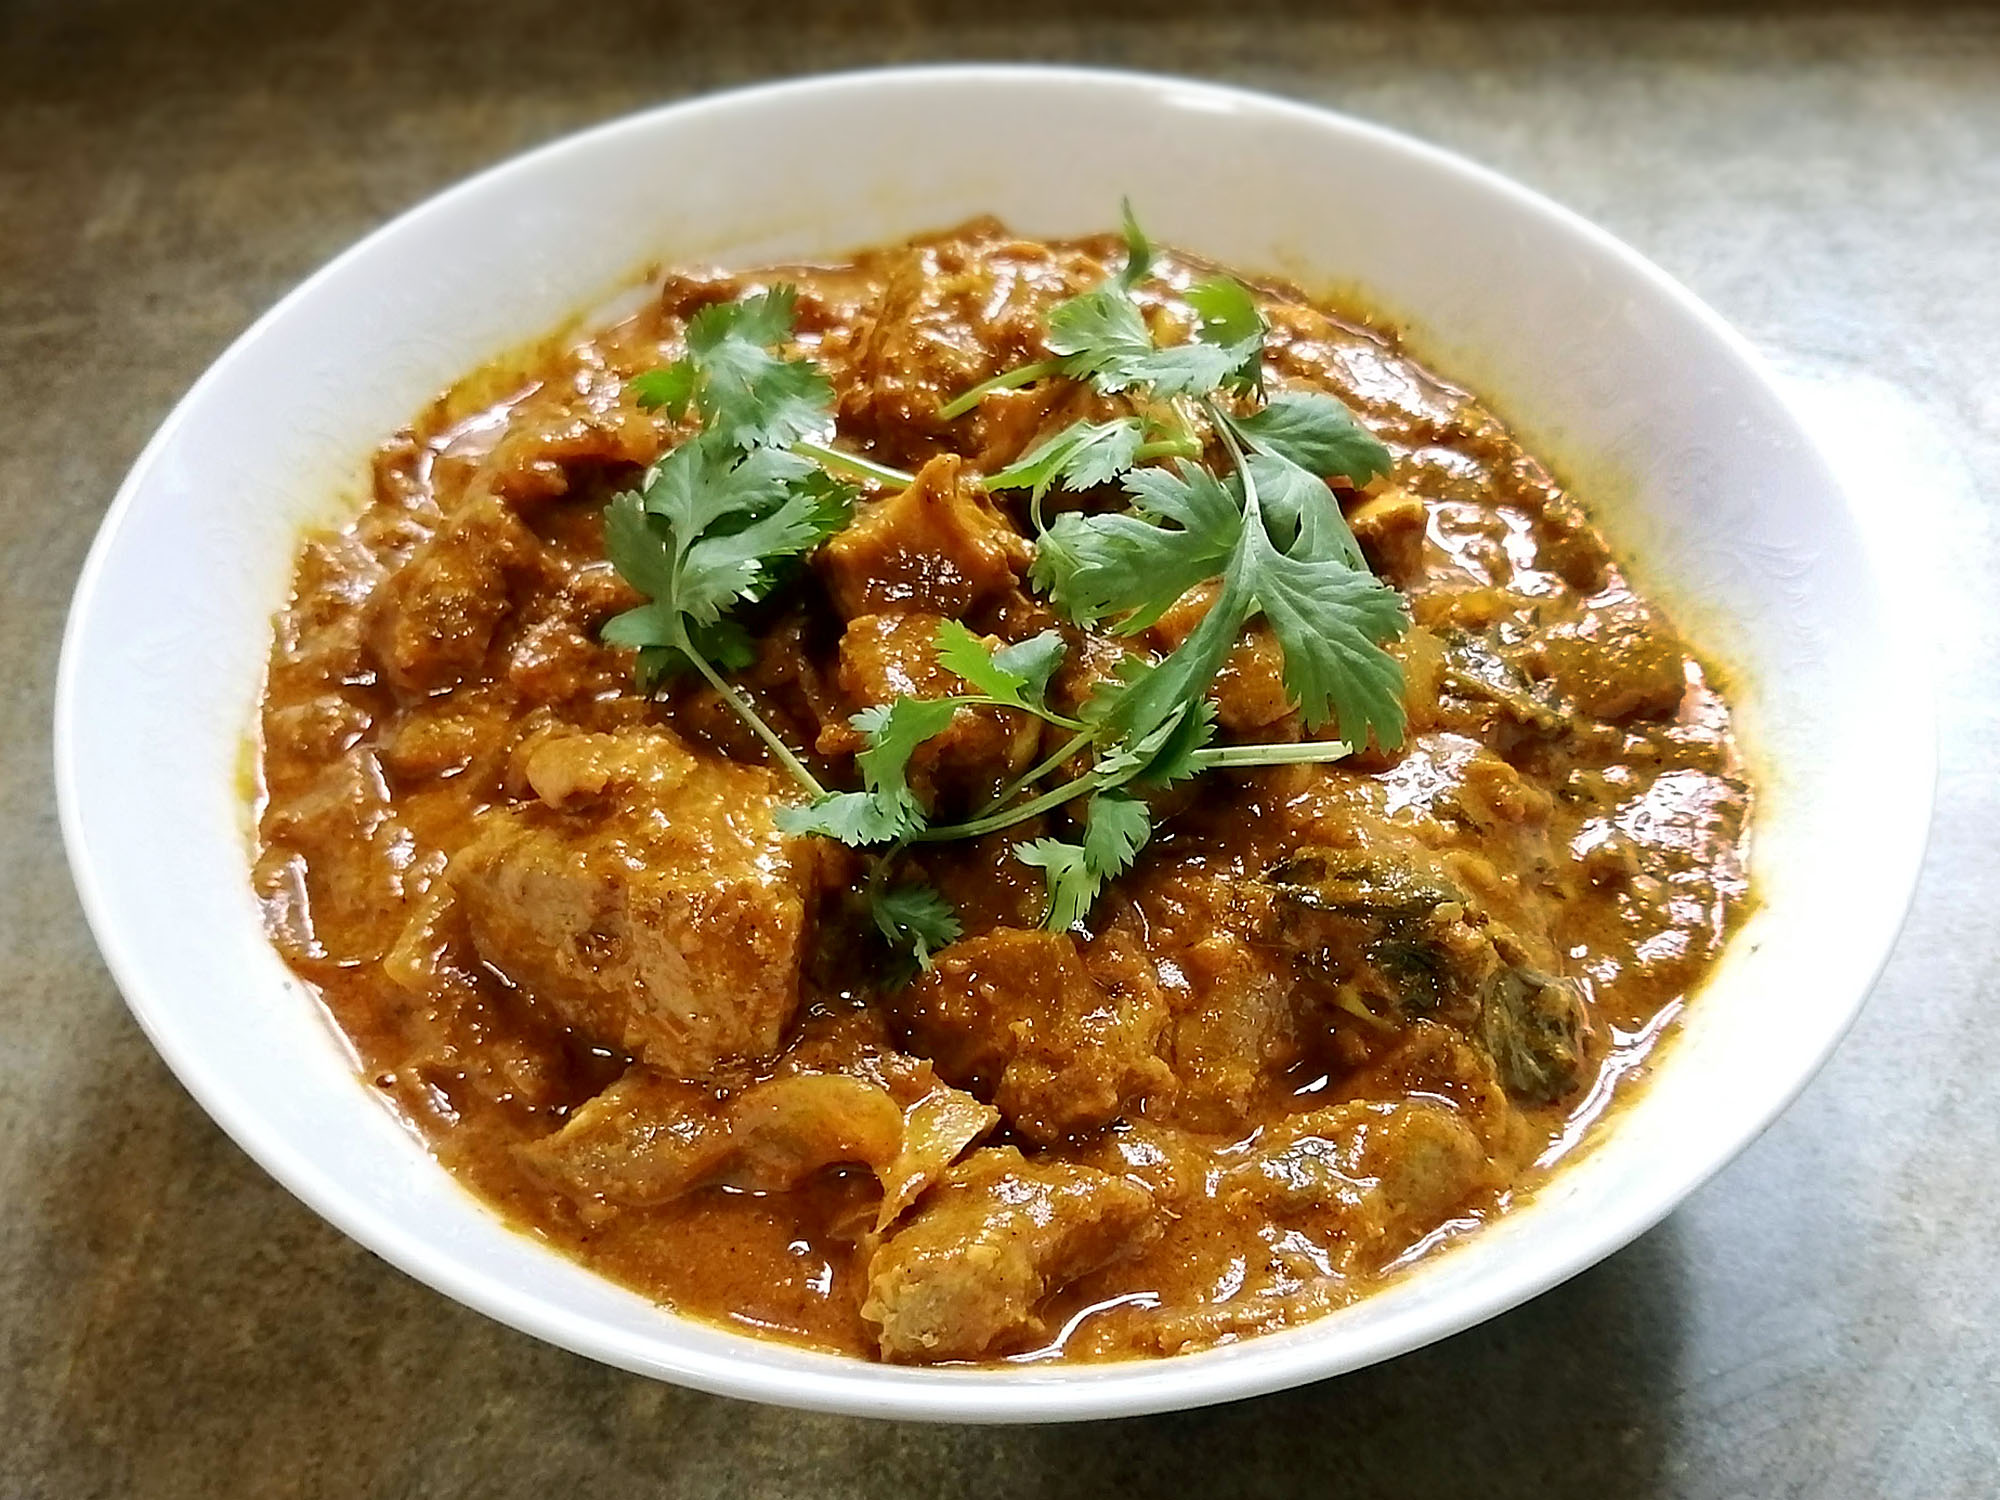 A large bowl of goat meat in a orange-brown curry sauce garnished with cilantro leaves. Photo by Paul Young.